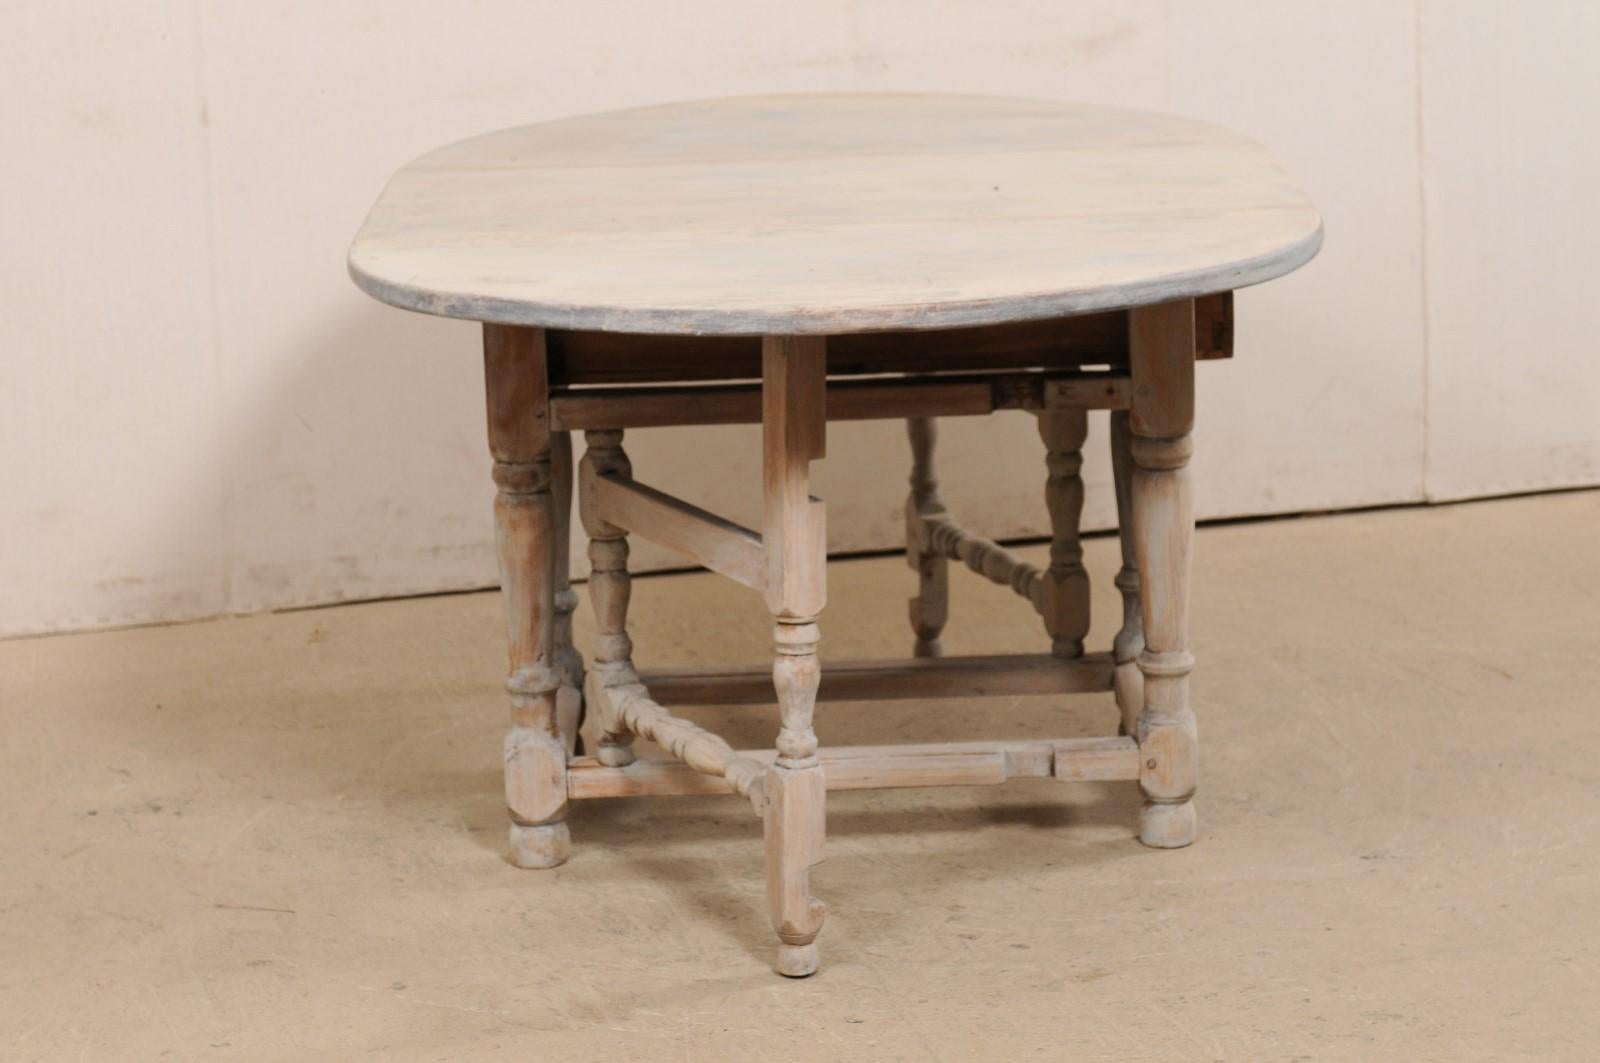 Swedish Oval-Shaped Double Gate Leg Painted Wood Table, Turn of the 18/19th C For Sale 3